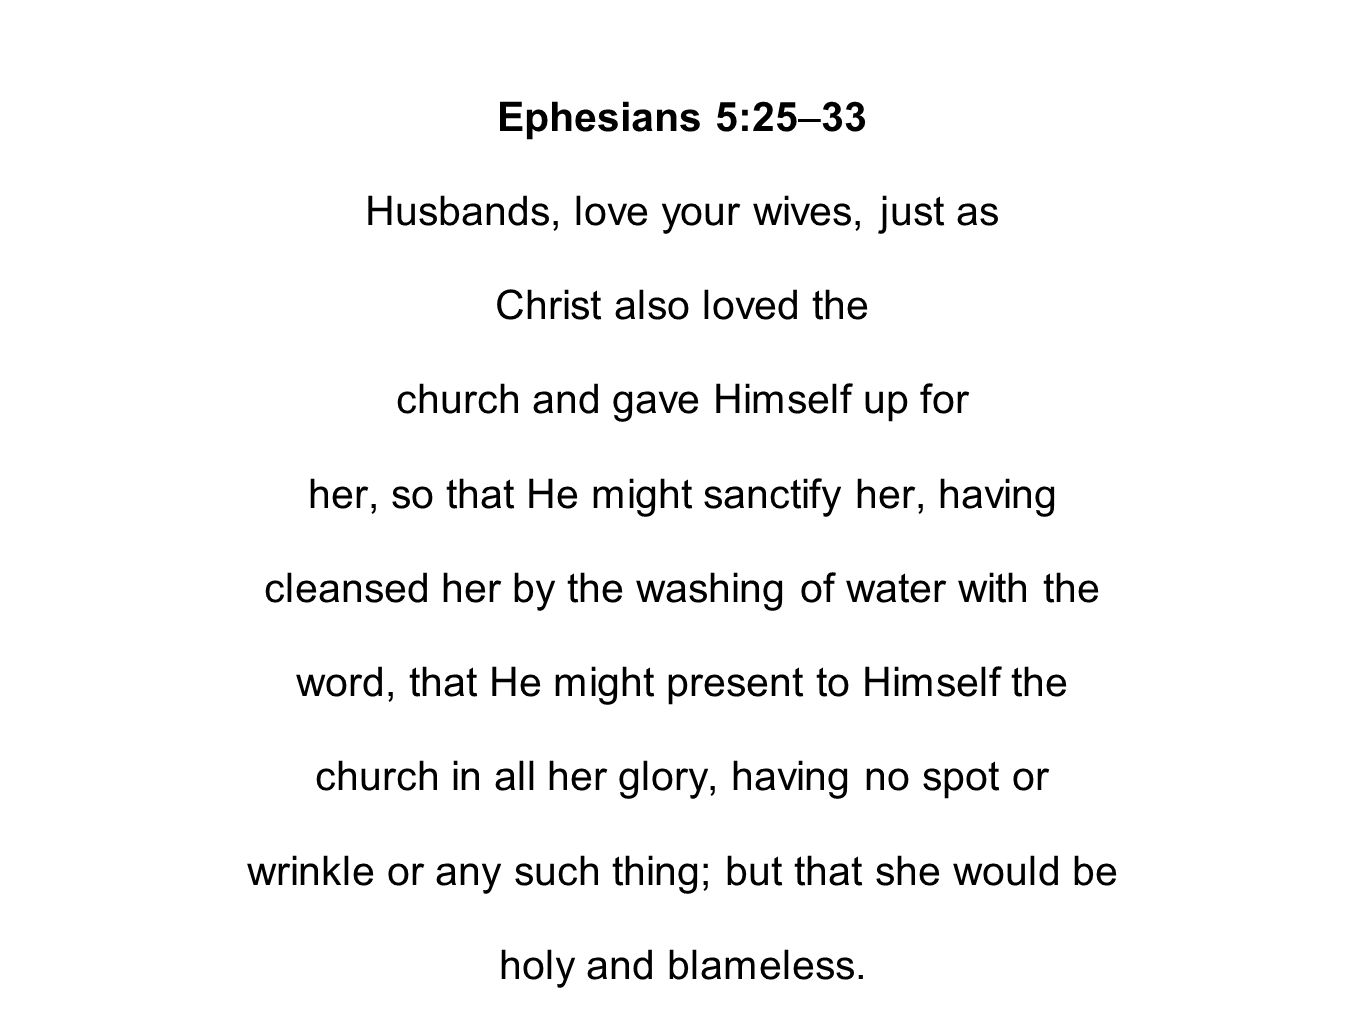 Ephesians 5:25–33 Husbands, love your wives, just as Christ also loved the church and gave Himself up for her, so that He might sanctify her, having cleansed her by the washing of water with the word, that He might present to Himself the church in all her glory, having no spot or wrinkle or any such thing; but that she would be holy and blameless.